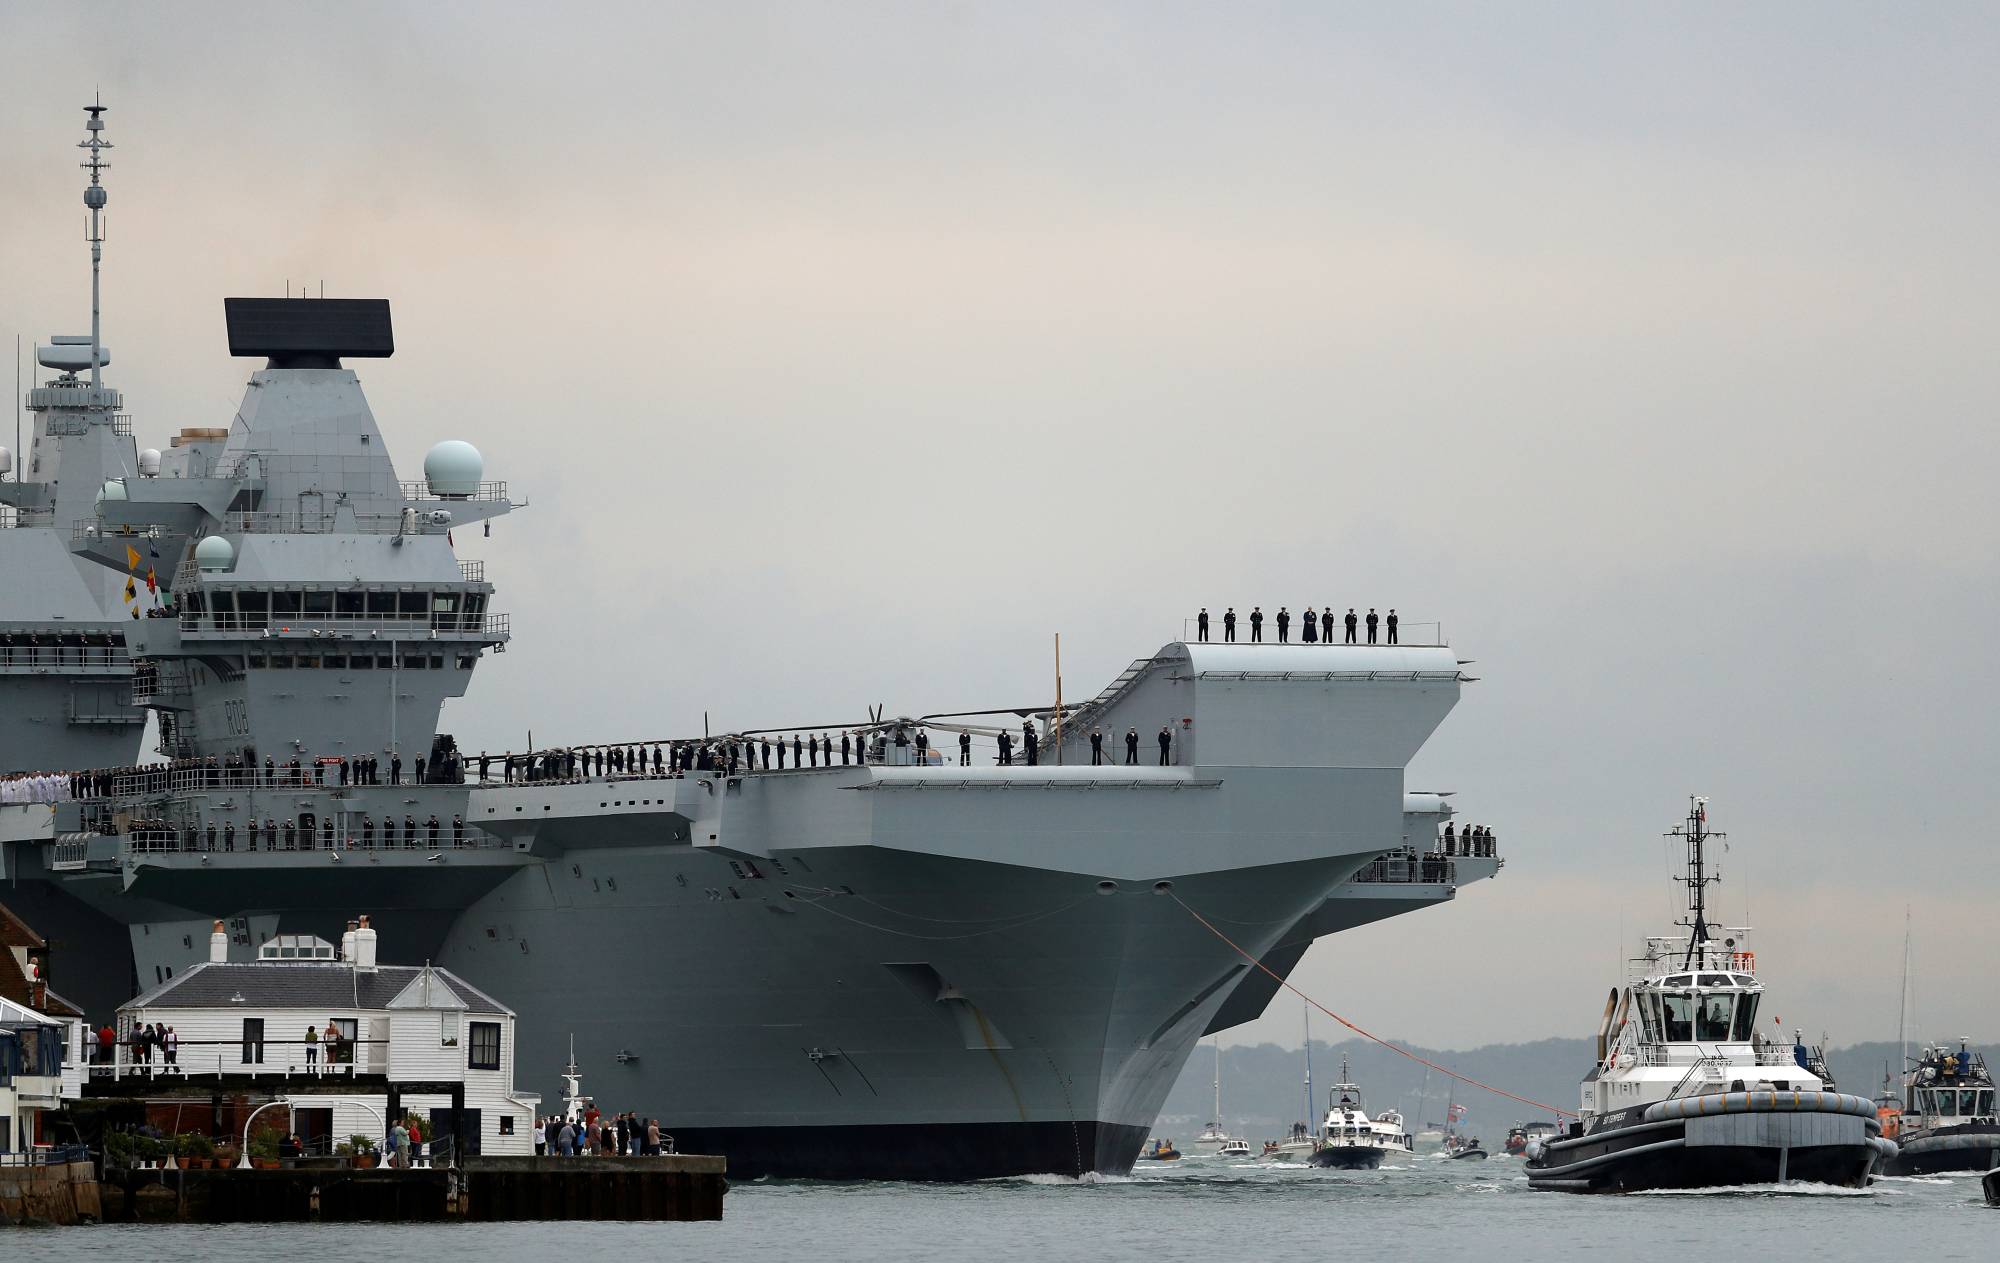 Britain's HMS Queen Elizabeth aircraft carrier will lead a flotilla of Royal Navy ships through Asian waters on port visits to Japan and South Korea on its maiden deployment, the British Embassy in Tokyo said Monday. | REUTERS